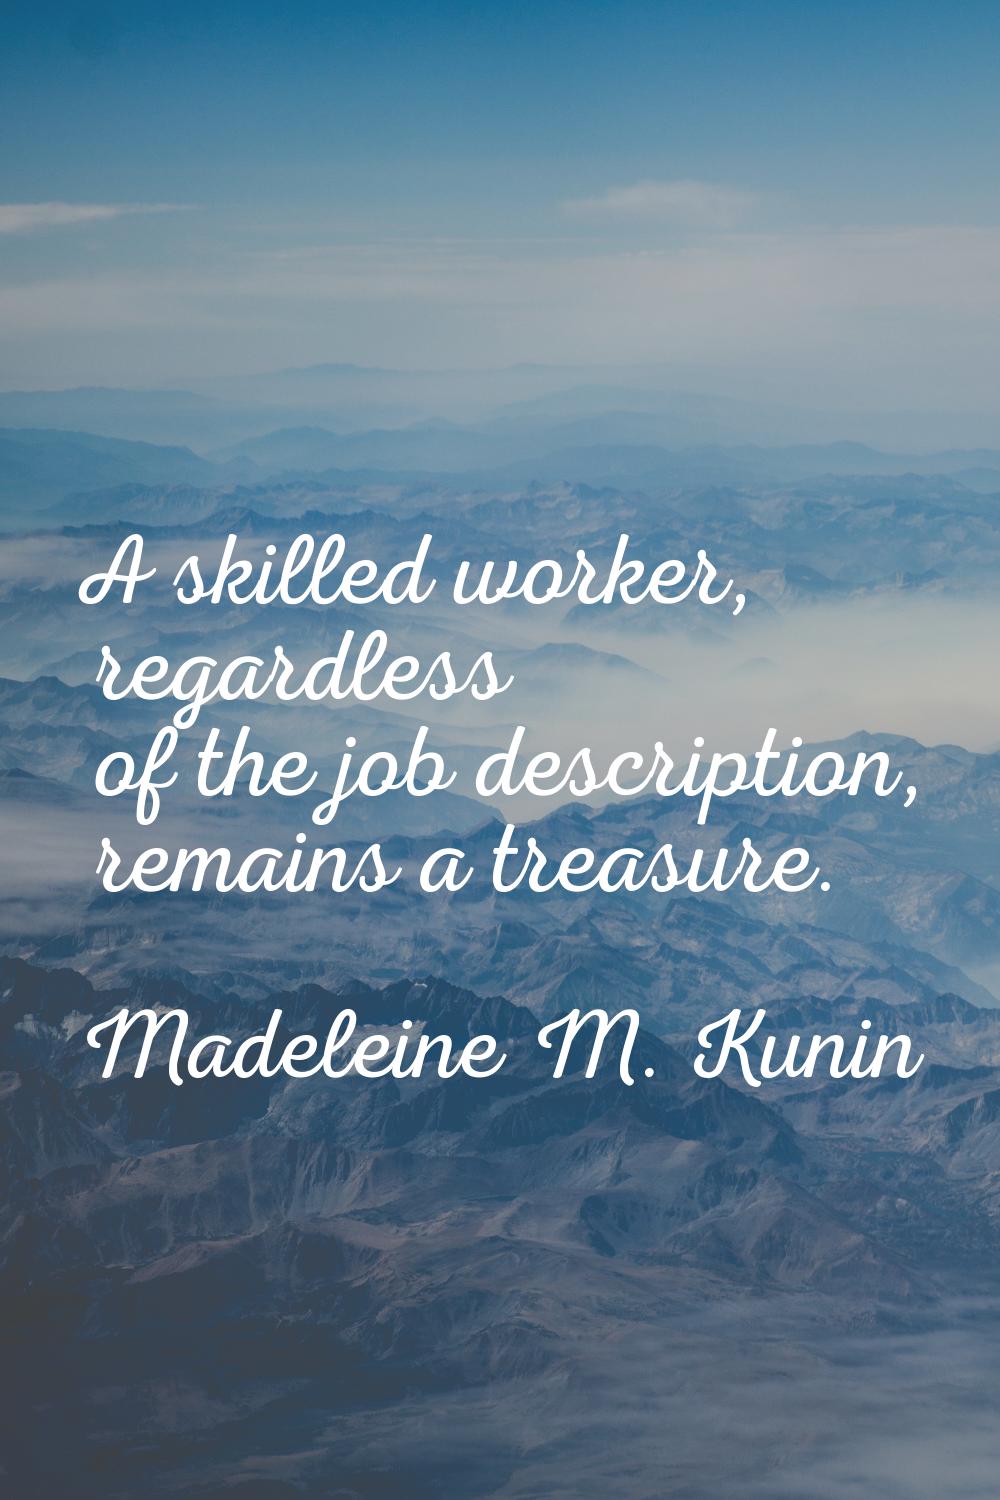 A skilled worker, regardless of the job description, remains a treasure.